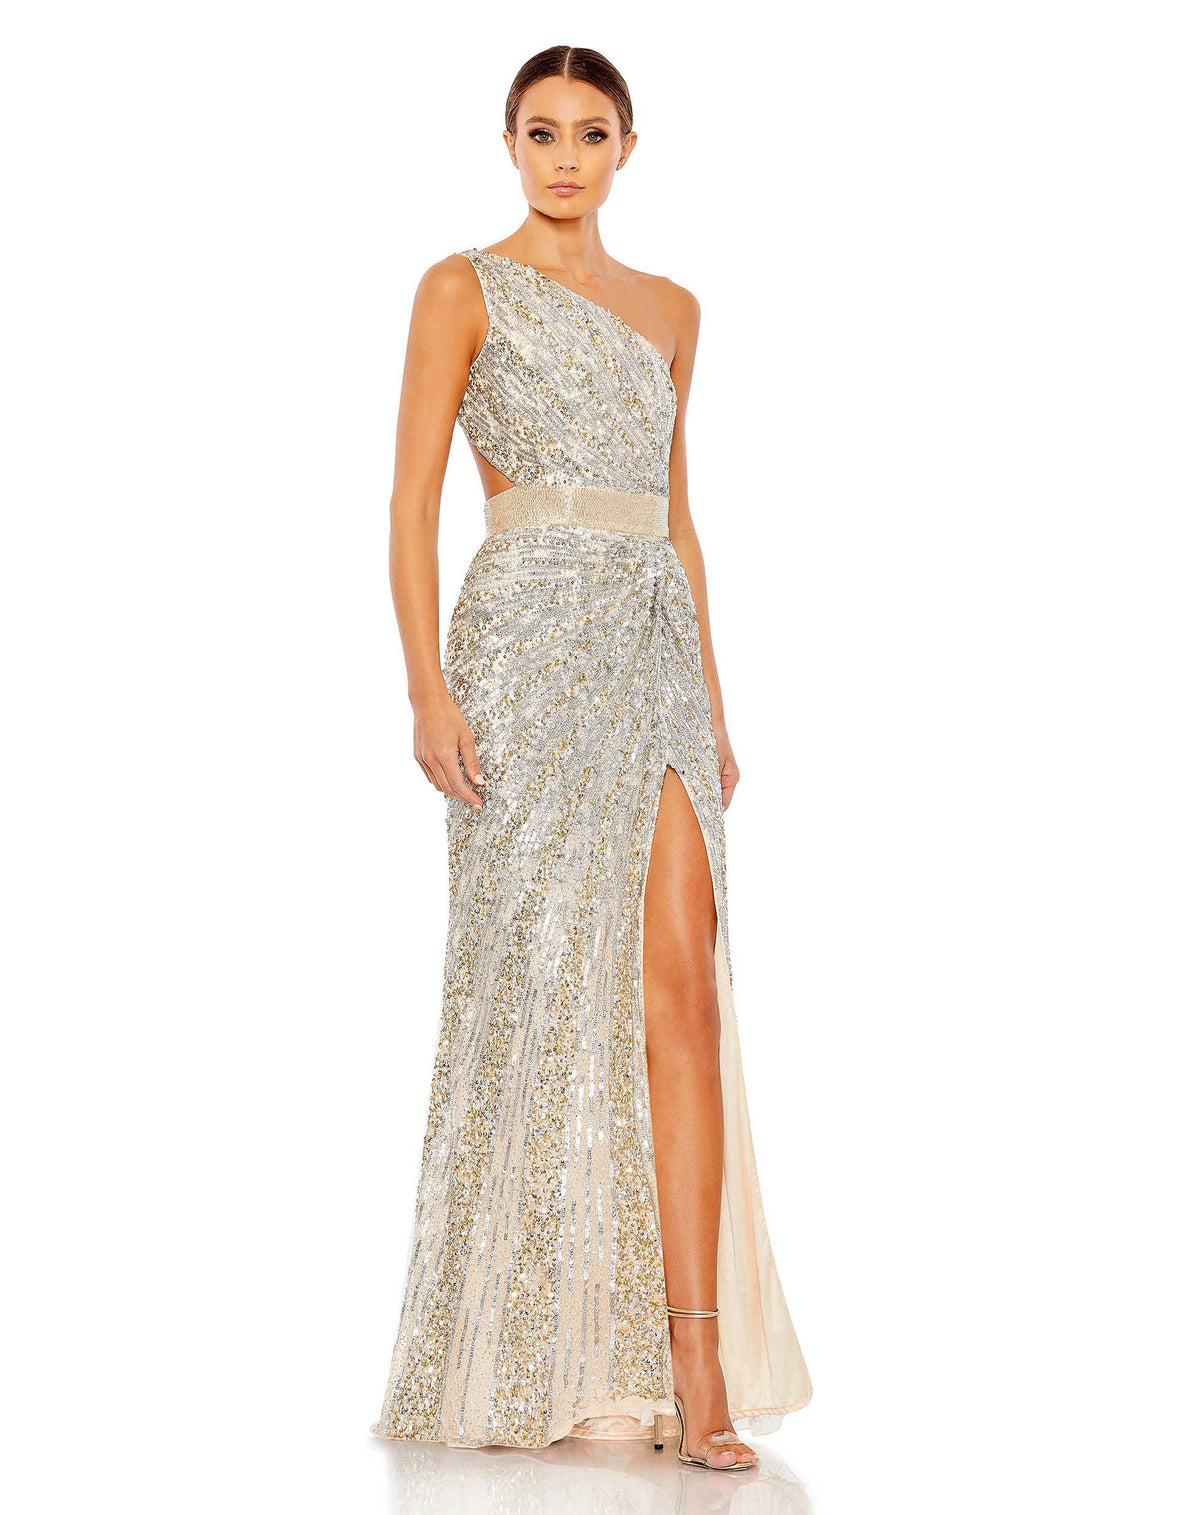 This elegant Mac Duggal, long, sequin, silver nude, asymmetric shoulder gown with sexy cut out detail at the waist, and a smouldering high slit is a met gala inspired gown for a very special occasion! This elegant evening dress is the perfect dress perfect for proms, black-tie affairs, wedding guest and special events!